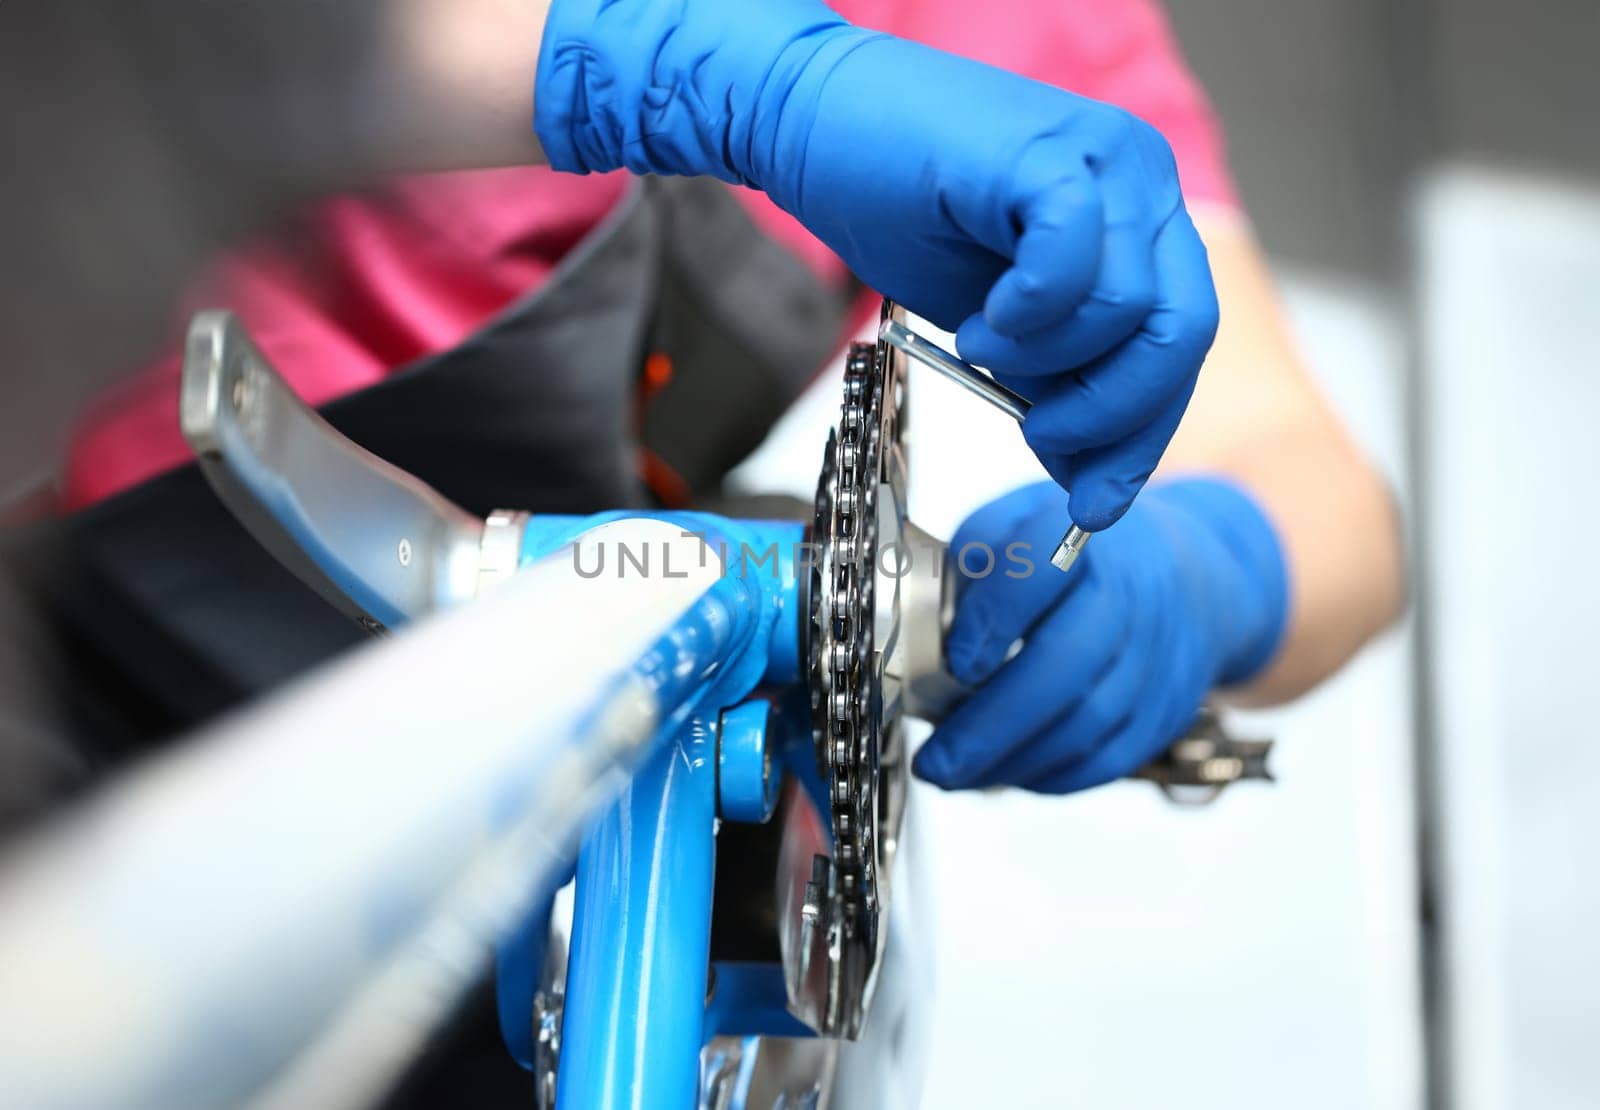 Close-up of mechanic serviceman installing assembling or adjusting bicycle gear on wheel in workshop. Technical expertise. Bike maintenance and repair service concept